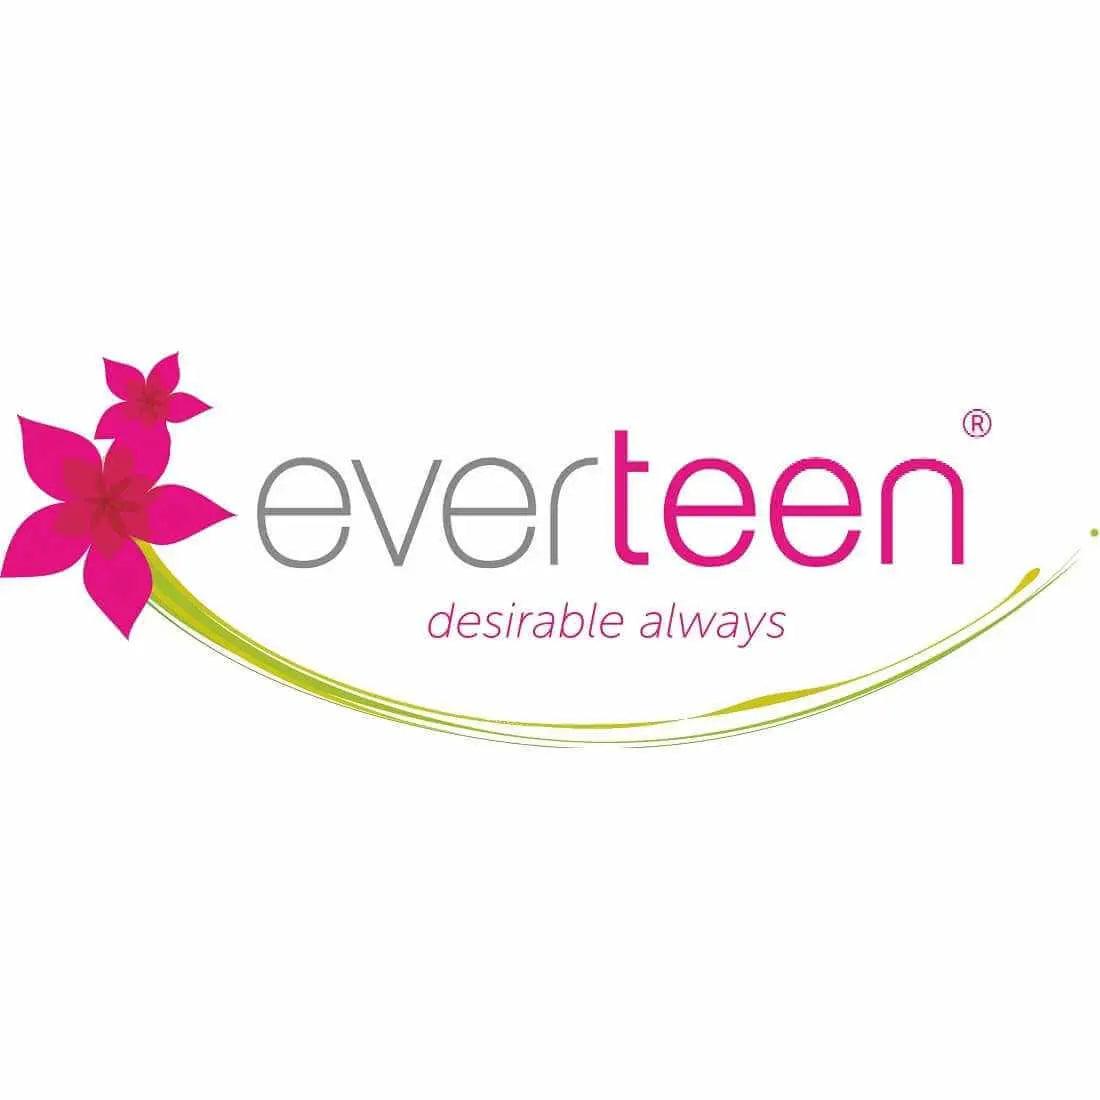 Buy 100% genuine everteen feminine hygiene products directly from the company's official brand store at https://everteen-neud.com/collections/everteen